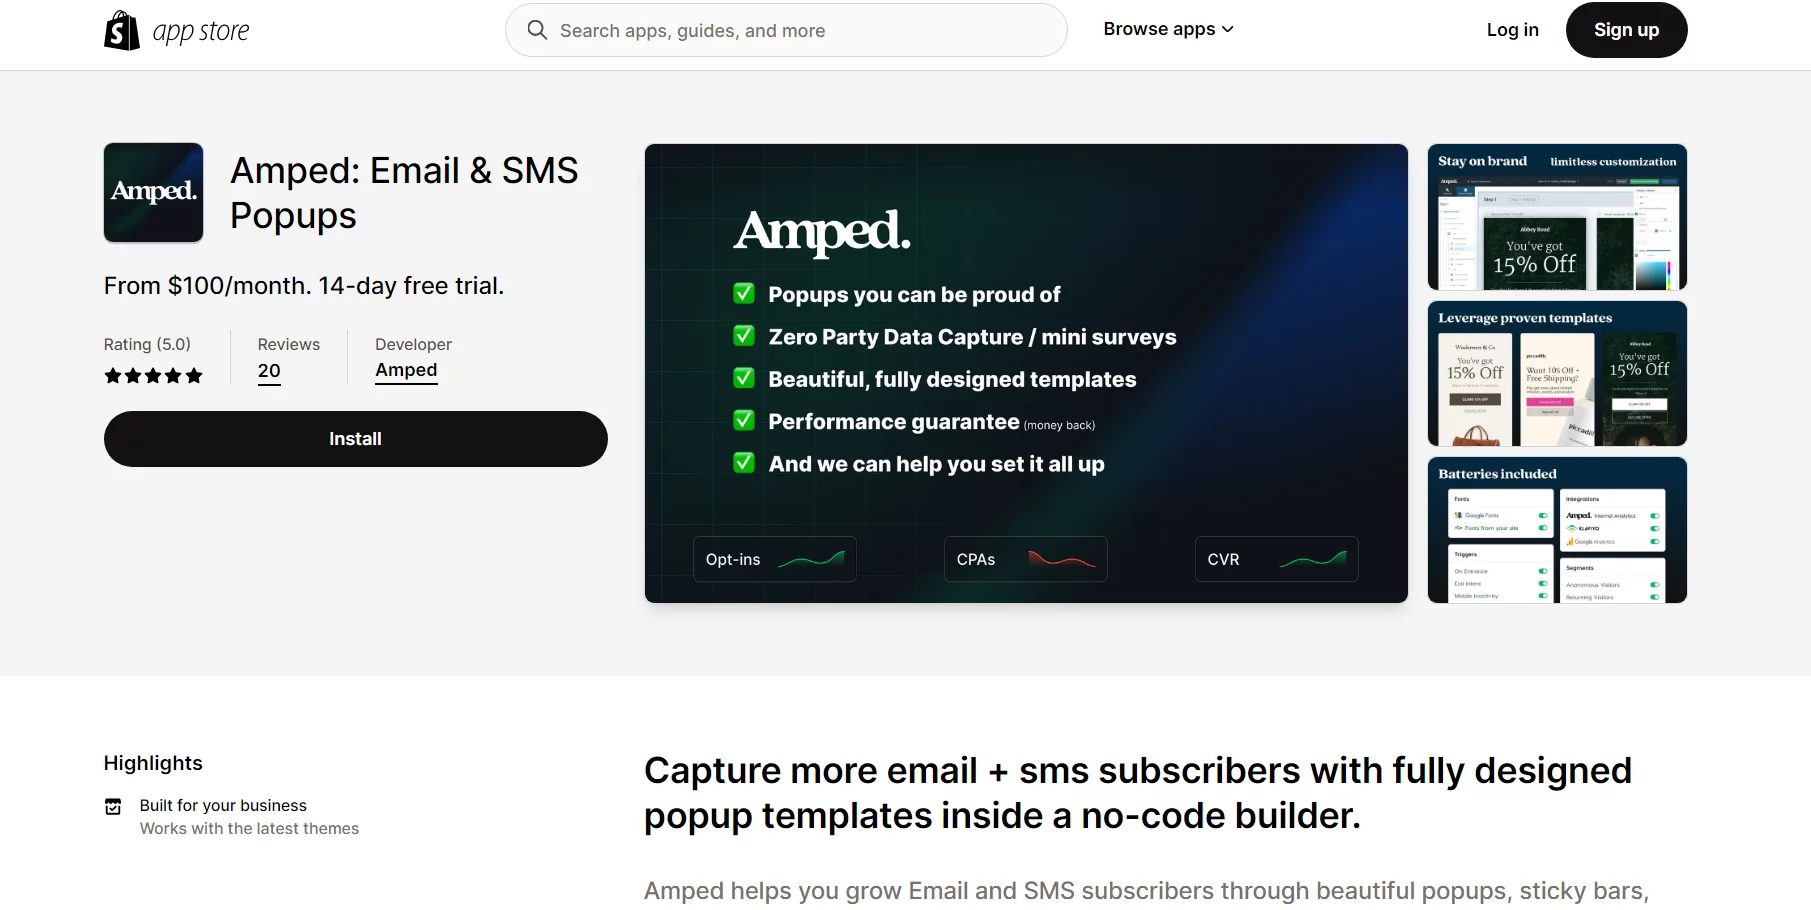 Best Shopify SMS Apps: Amped: Email & SMS Popups